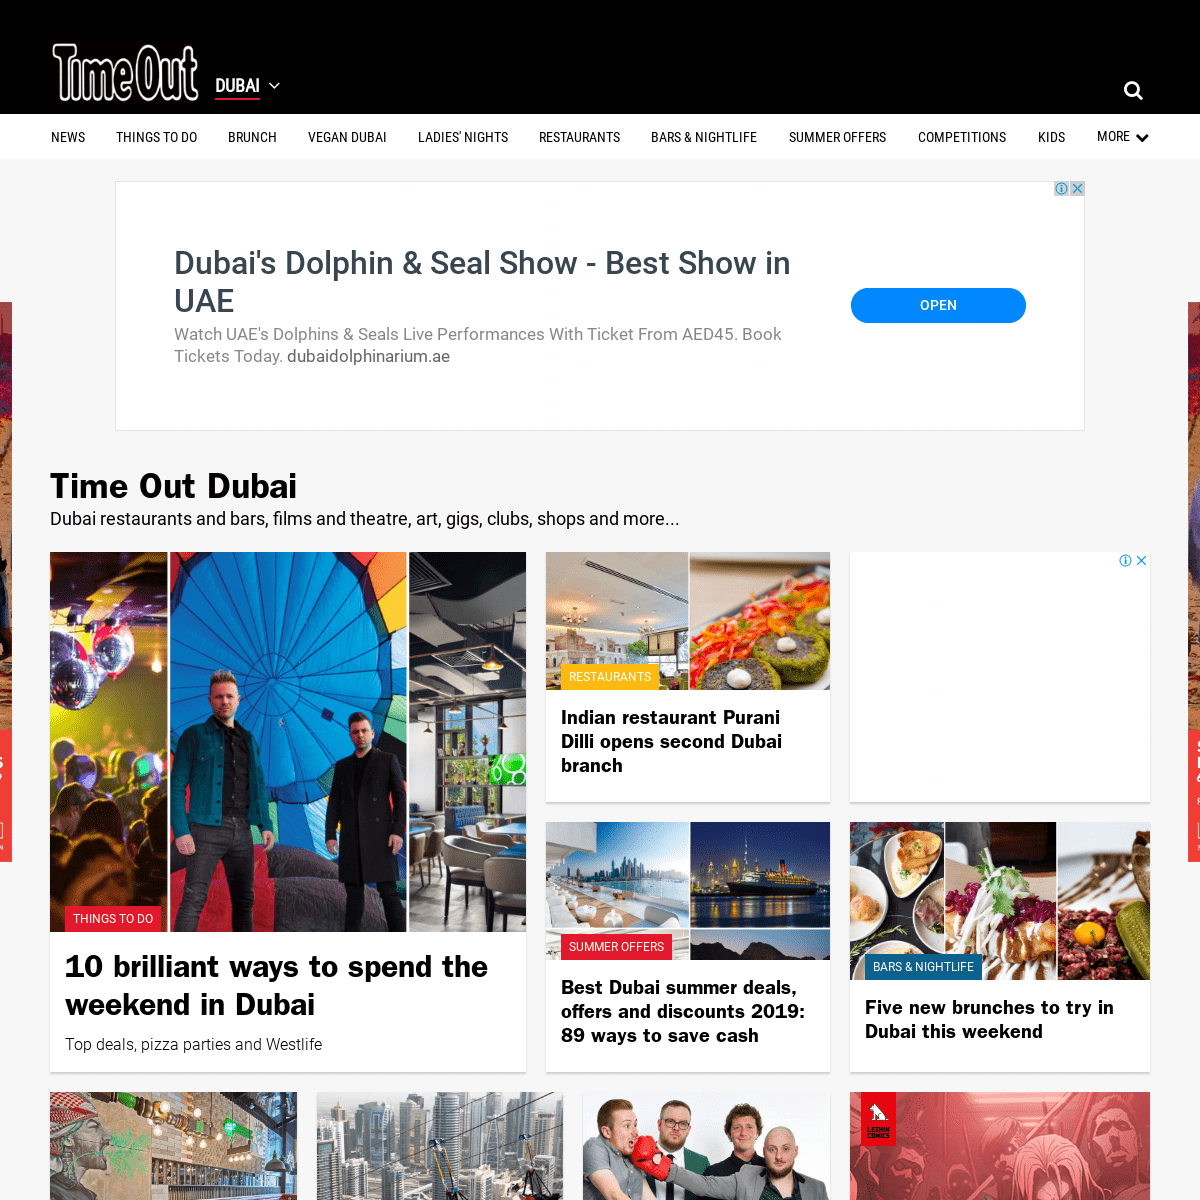 Time Out Dubai - Information, Events, Reviews & What's On in the City of Dubai